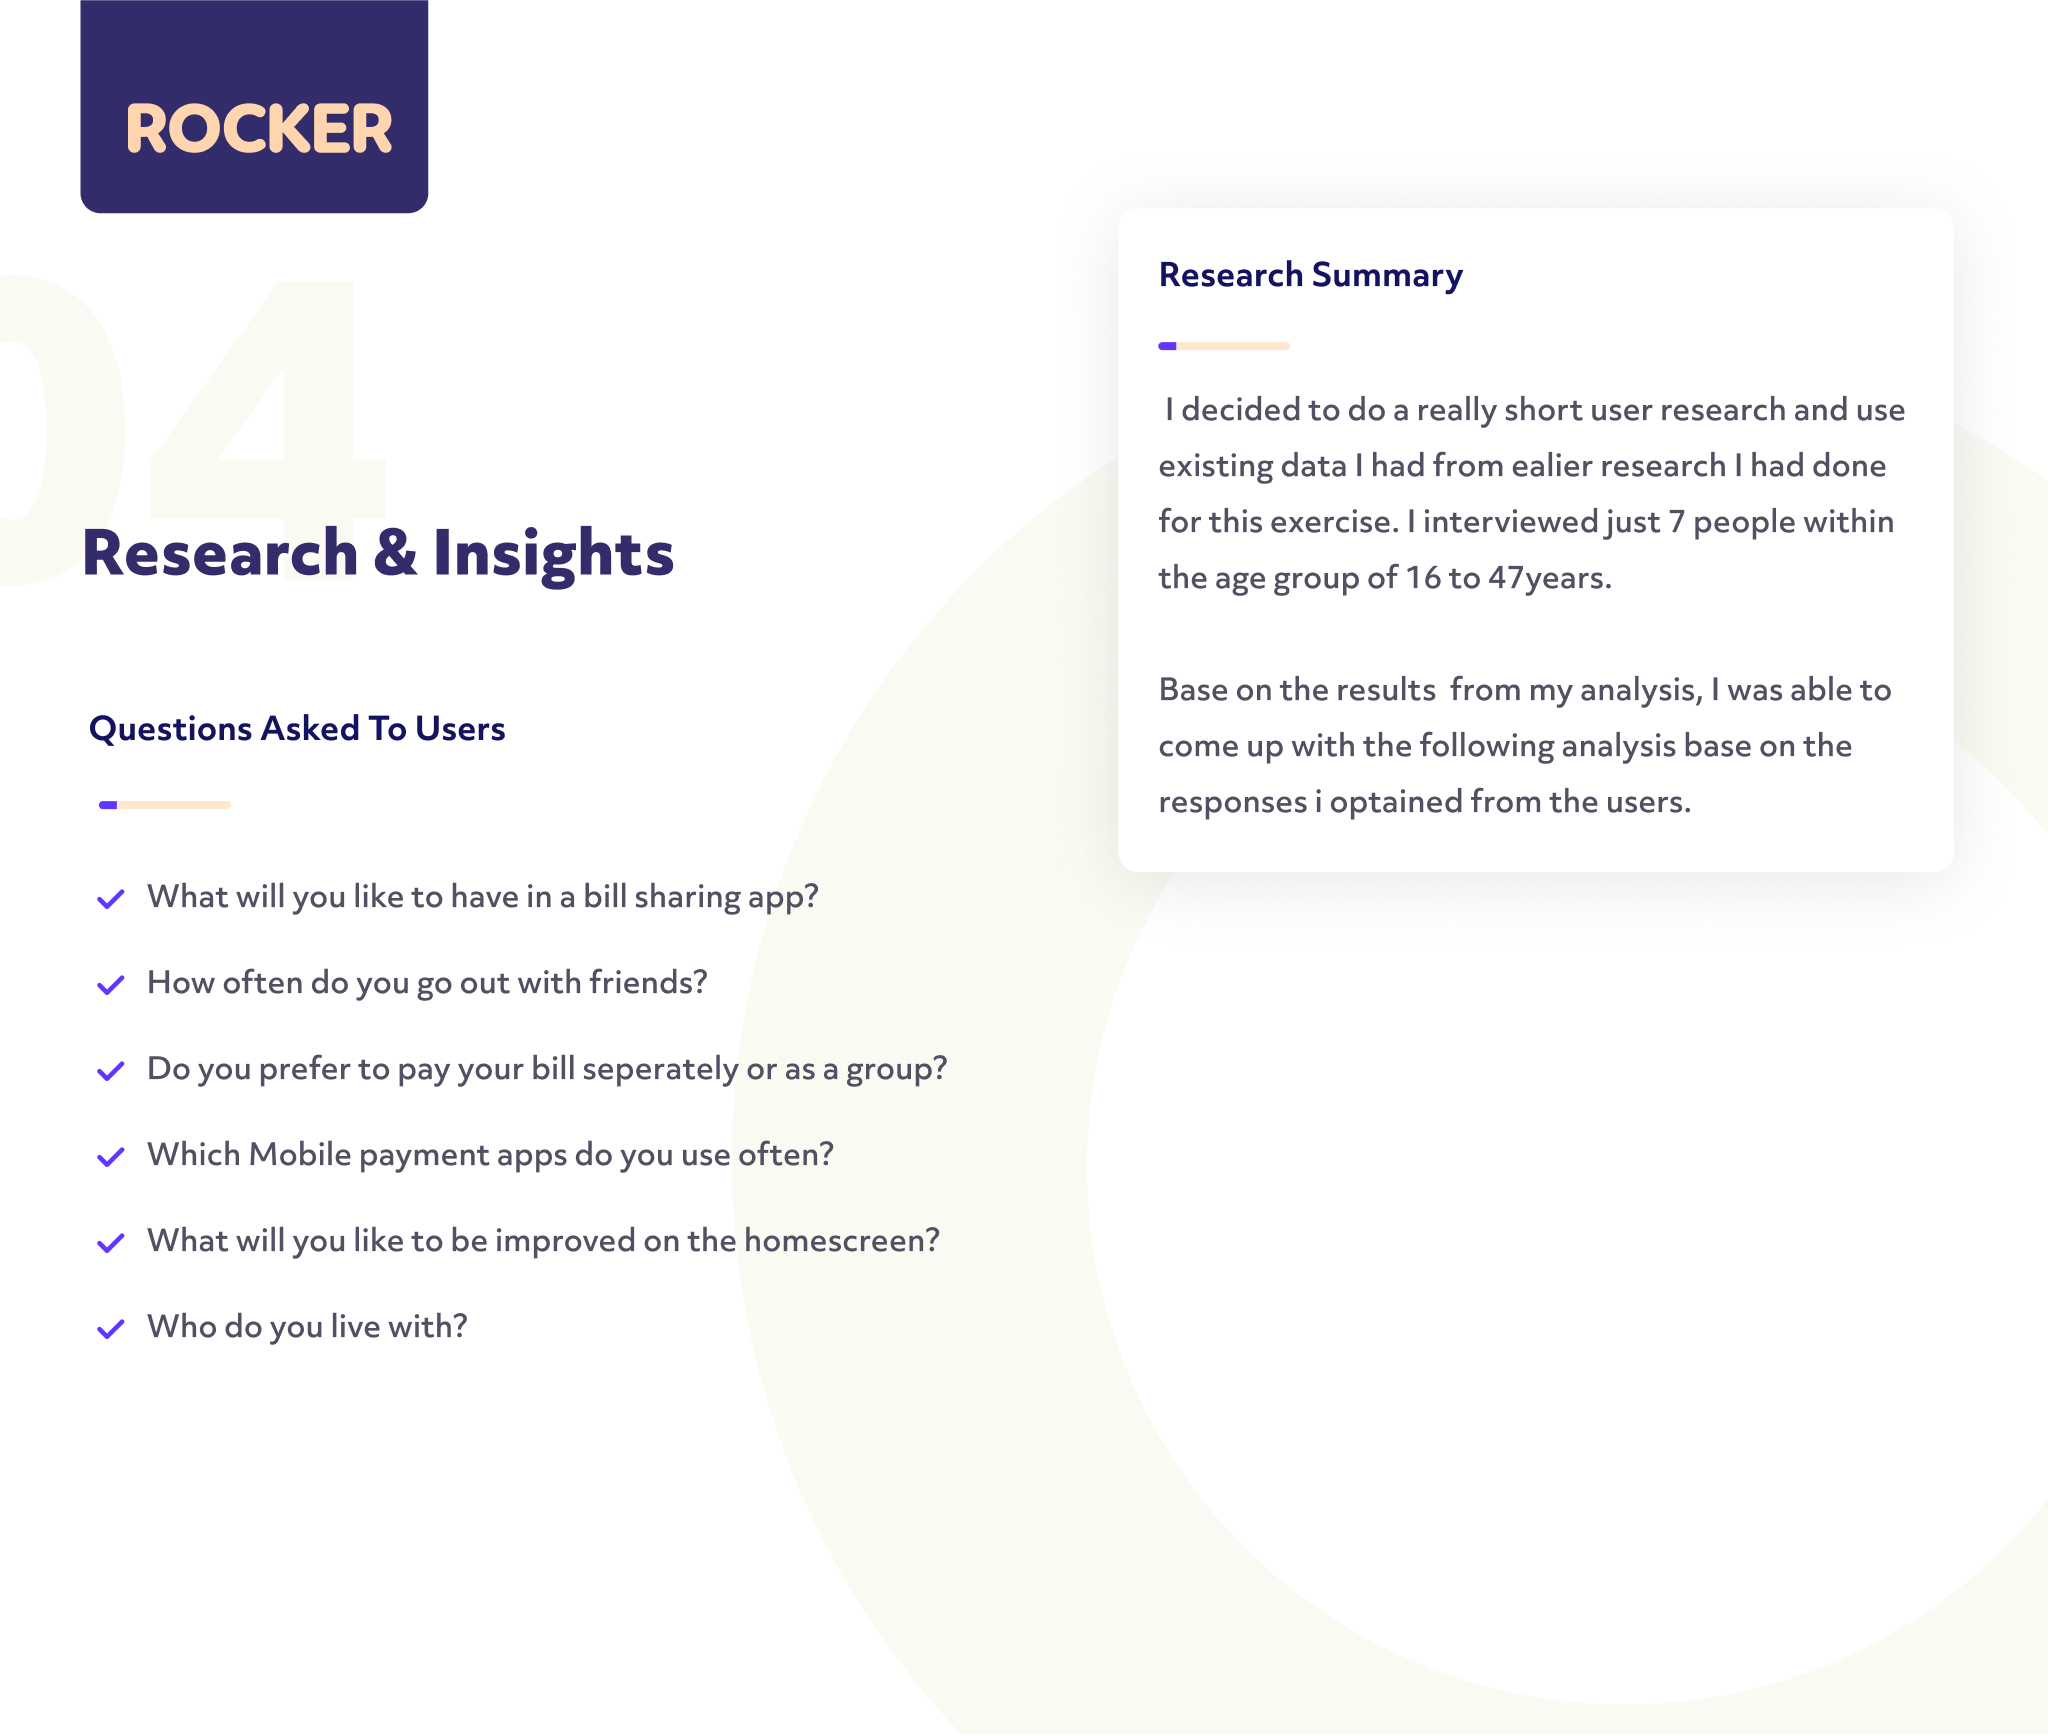 4 Research insights